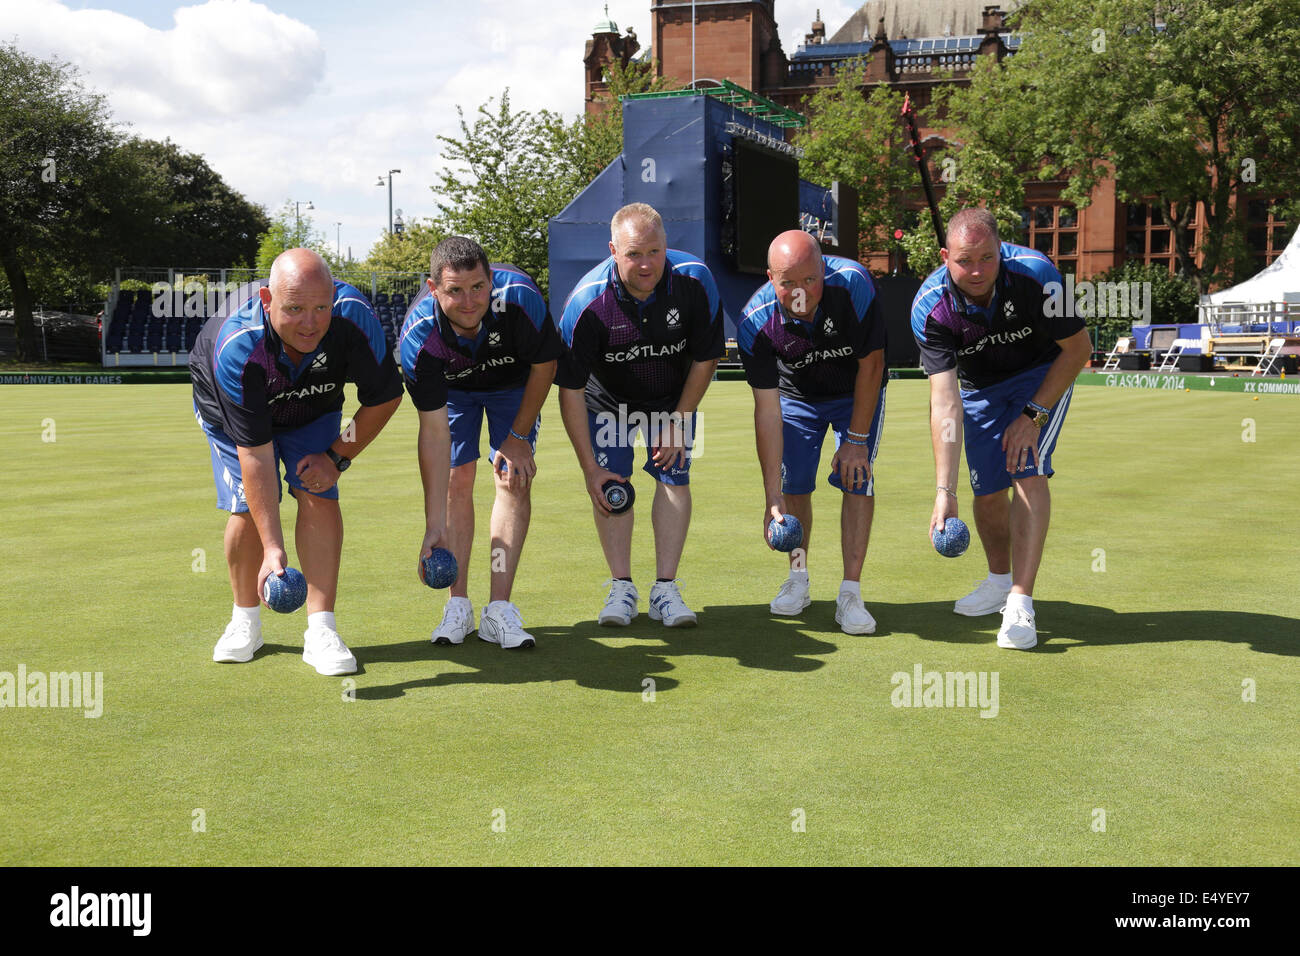 Kelvingrove Lawn Bowls Centre, Glasgow, Scotland, UK, Thursday, 17th July, 2014. Team Scotland Men's Team in the venue for the 2014 Commonwealth Games Lawn Bowls Competition left to right, Alex Marshall, Neils Speirs, Darren Burnett, David Peacock and Paul Foster Stock Photo